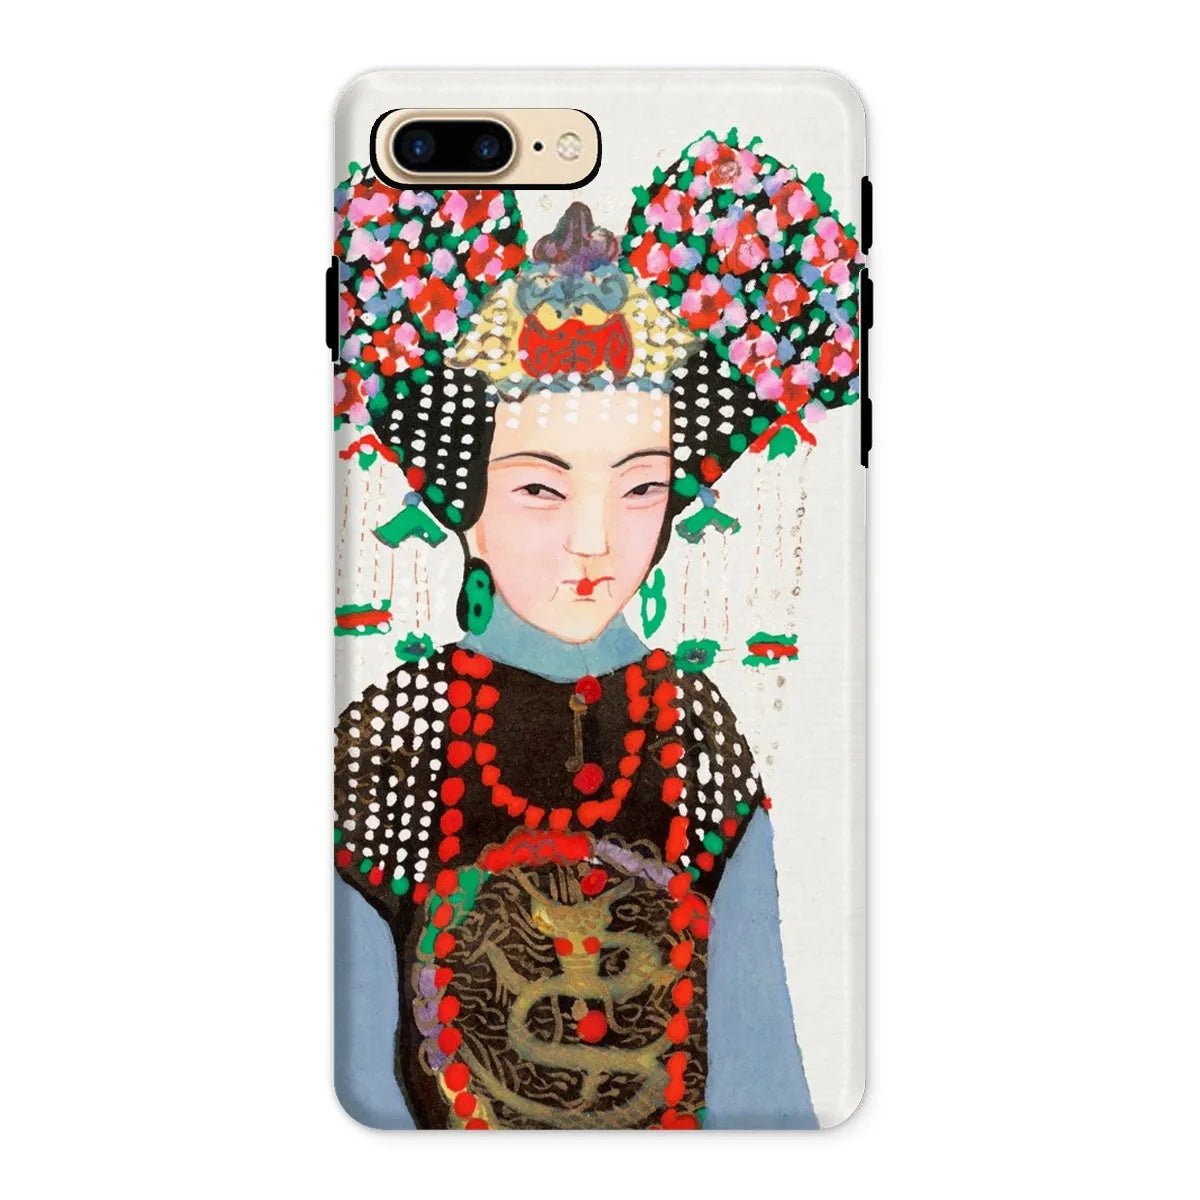 Chinese Empress - Manchu Art Phone Case - Iphone 8 Plus / Matte - Mobile Phone Cases - Aesthetic Art